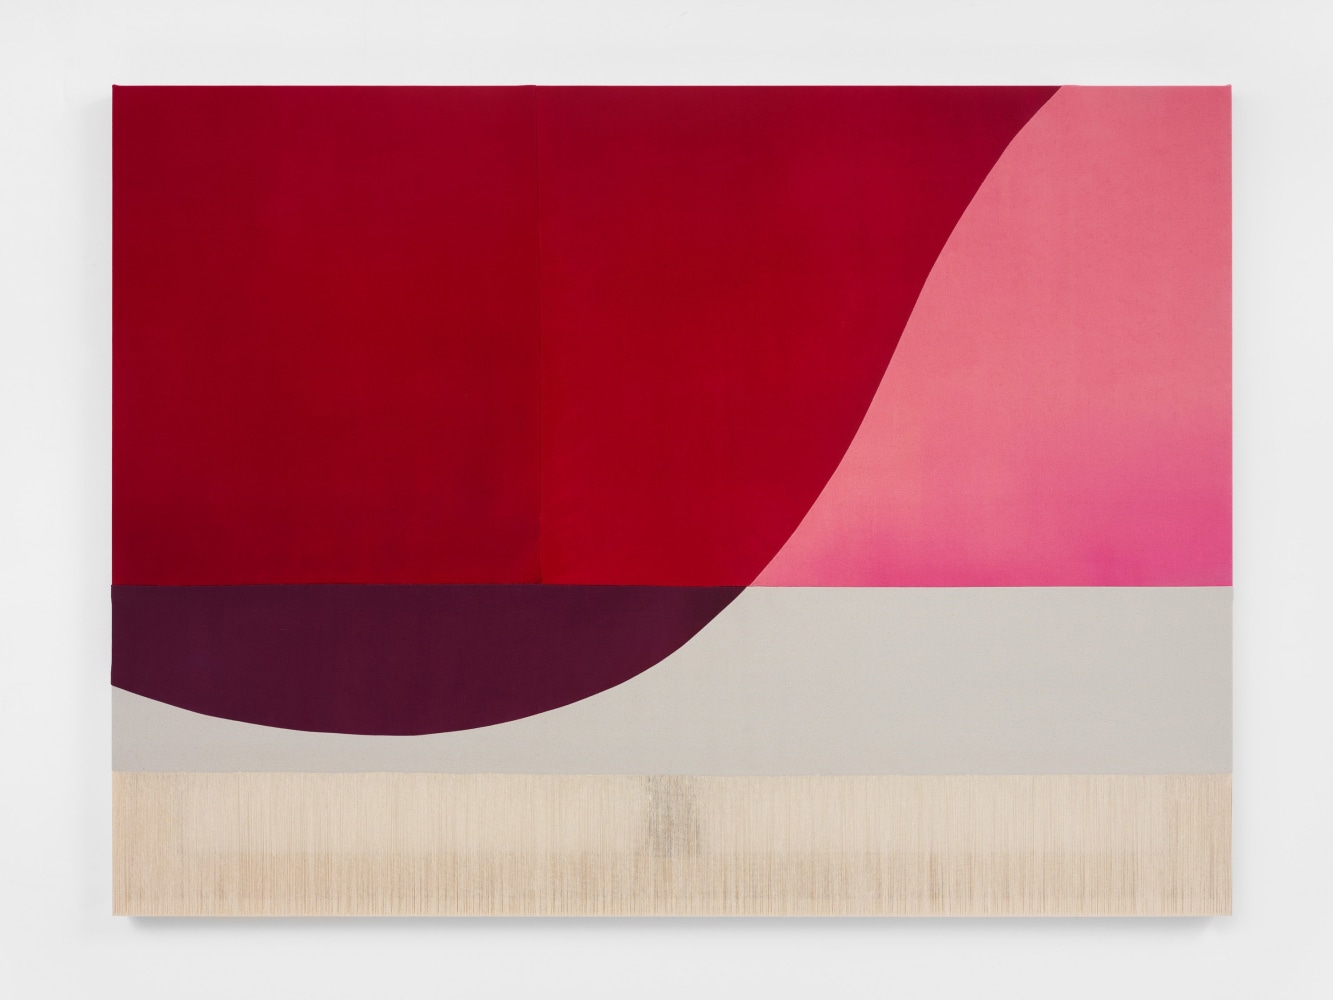 Rebecca Ward&amp;nbsp;
red tulip, 2022&amp;nbsp;
acrylic and dye on stitched canvas
45 x 60 inches (114.3 x 152.4 cm)
(RWA22-13)&amp;nbsp;